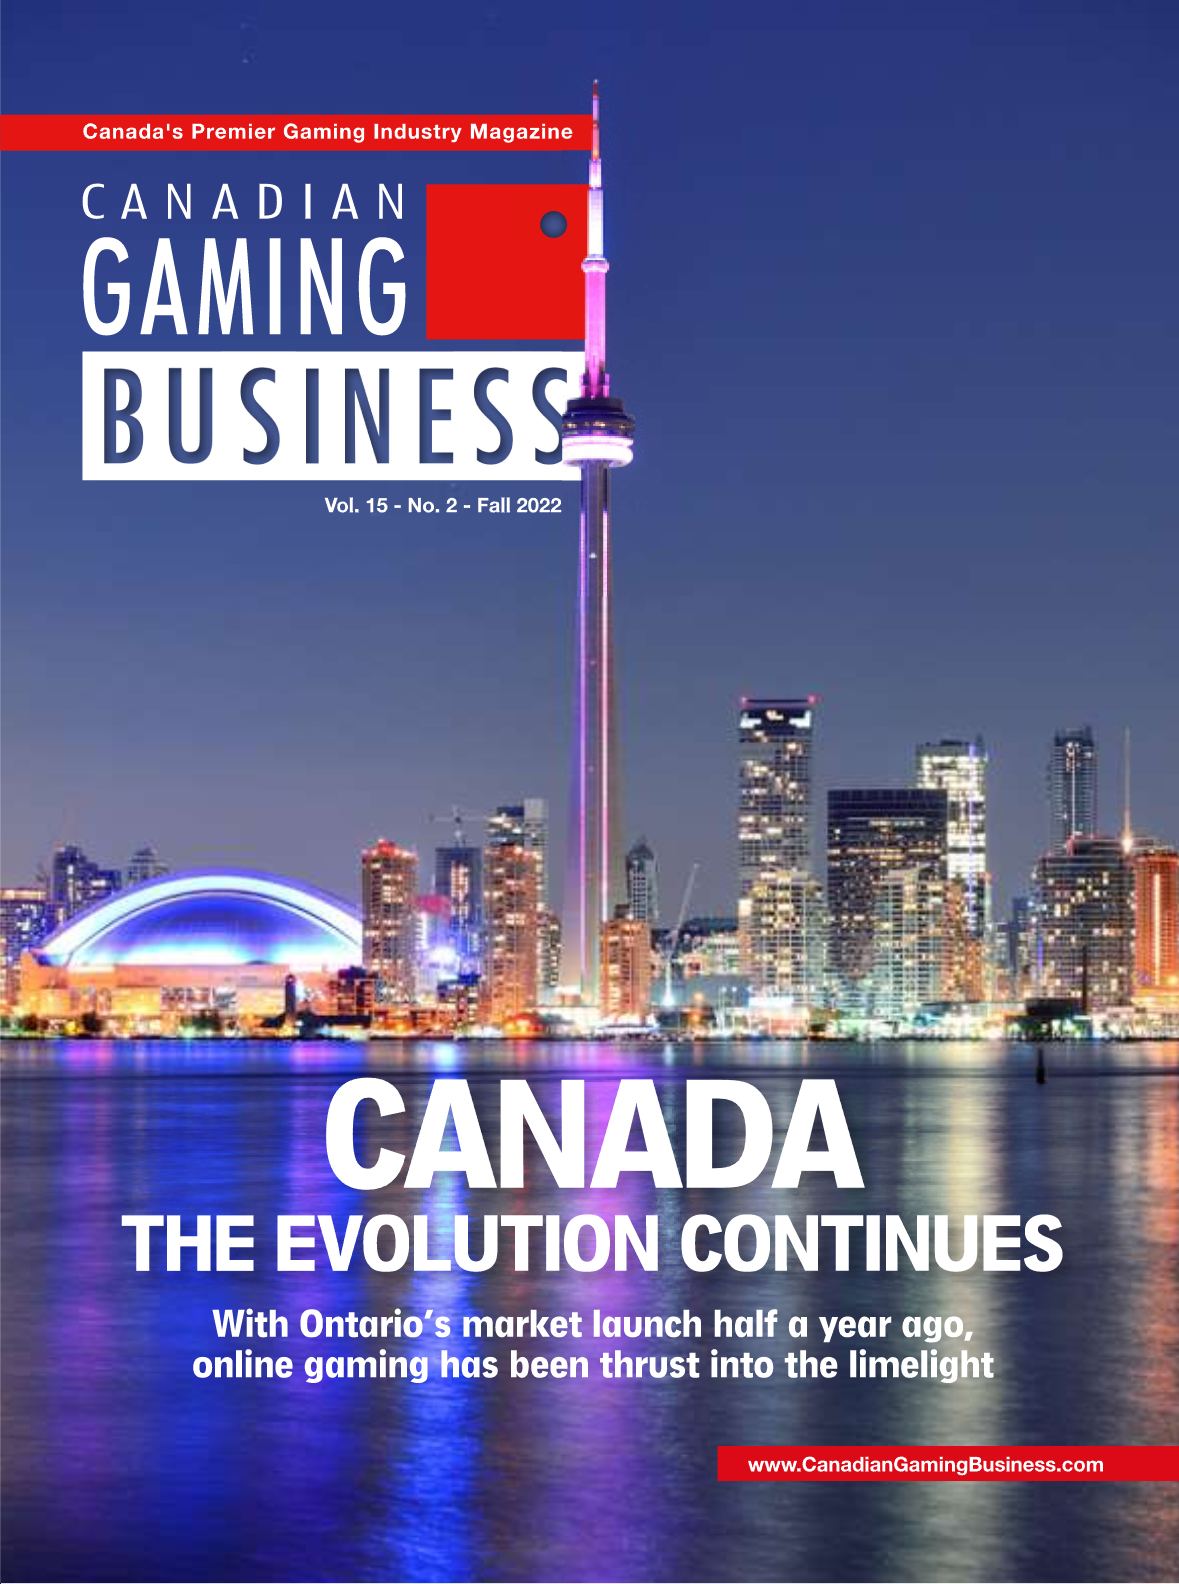 Canadian Gaming Business Magazine Fall 2022